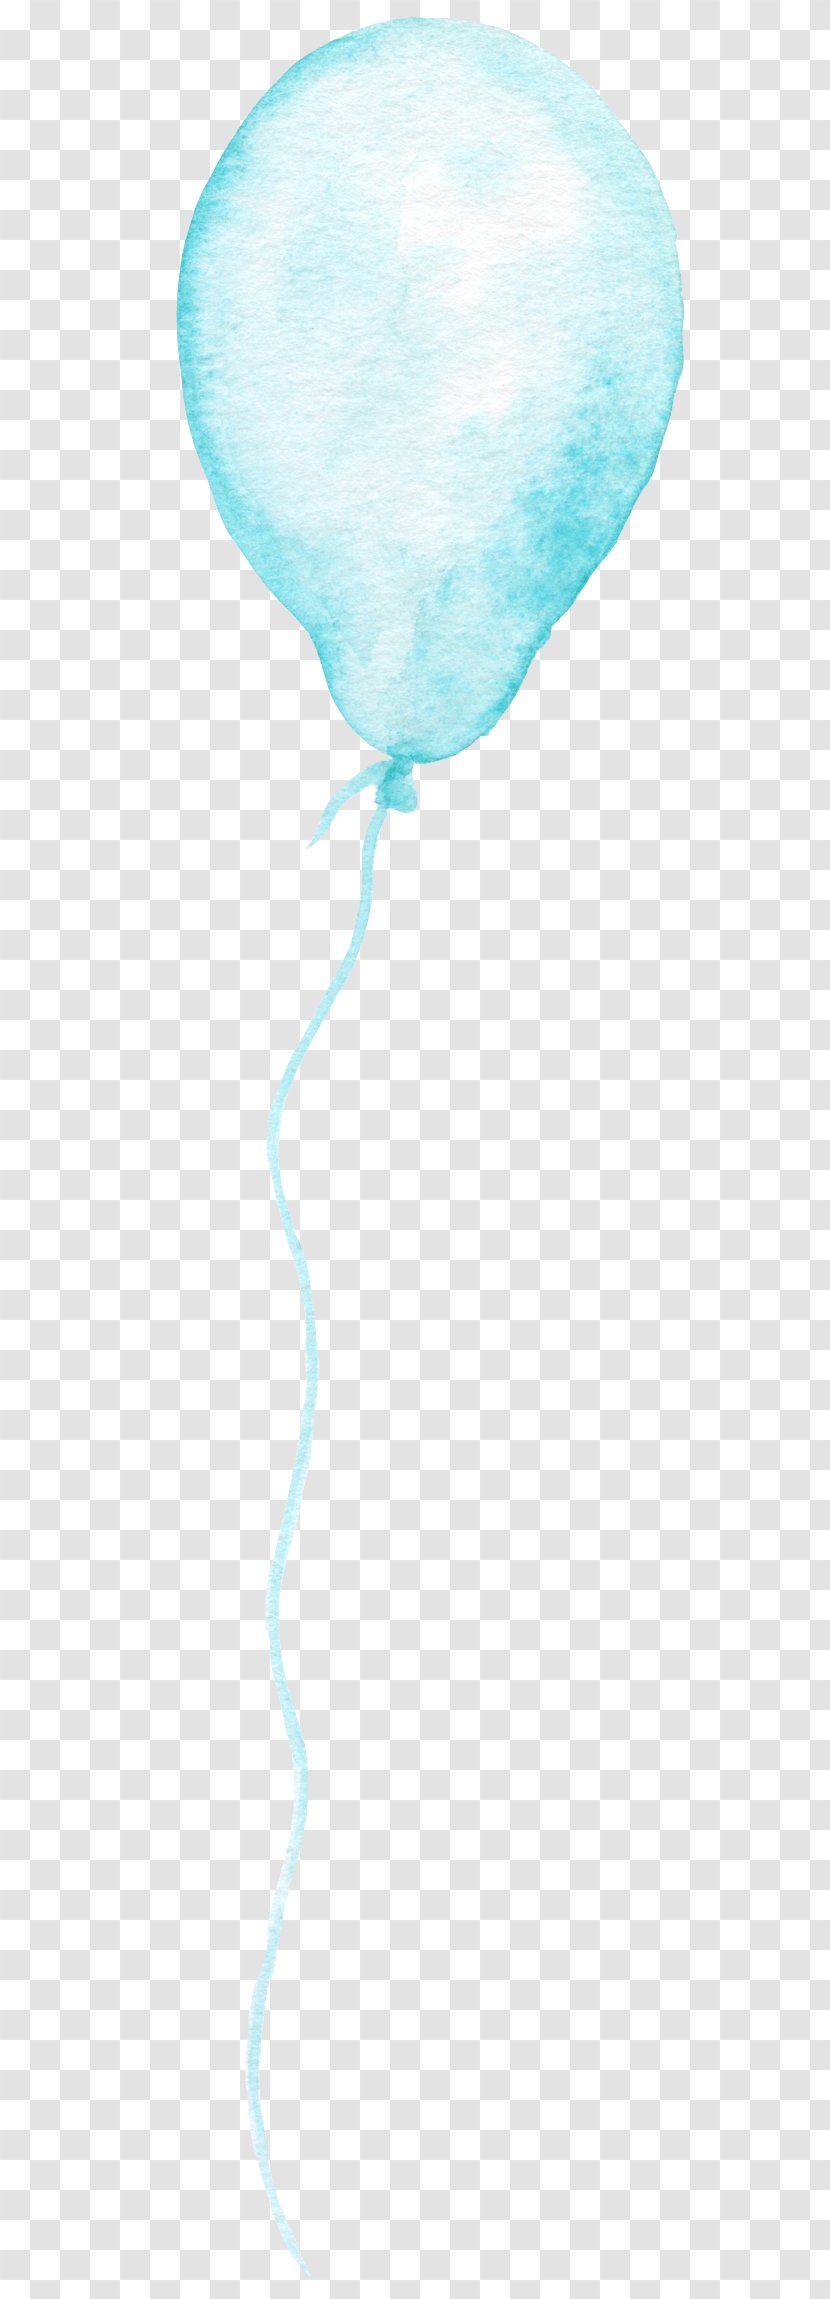 Turquoise Water - Hand-painted Balloons Transparent PNG